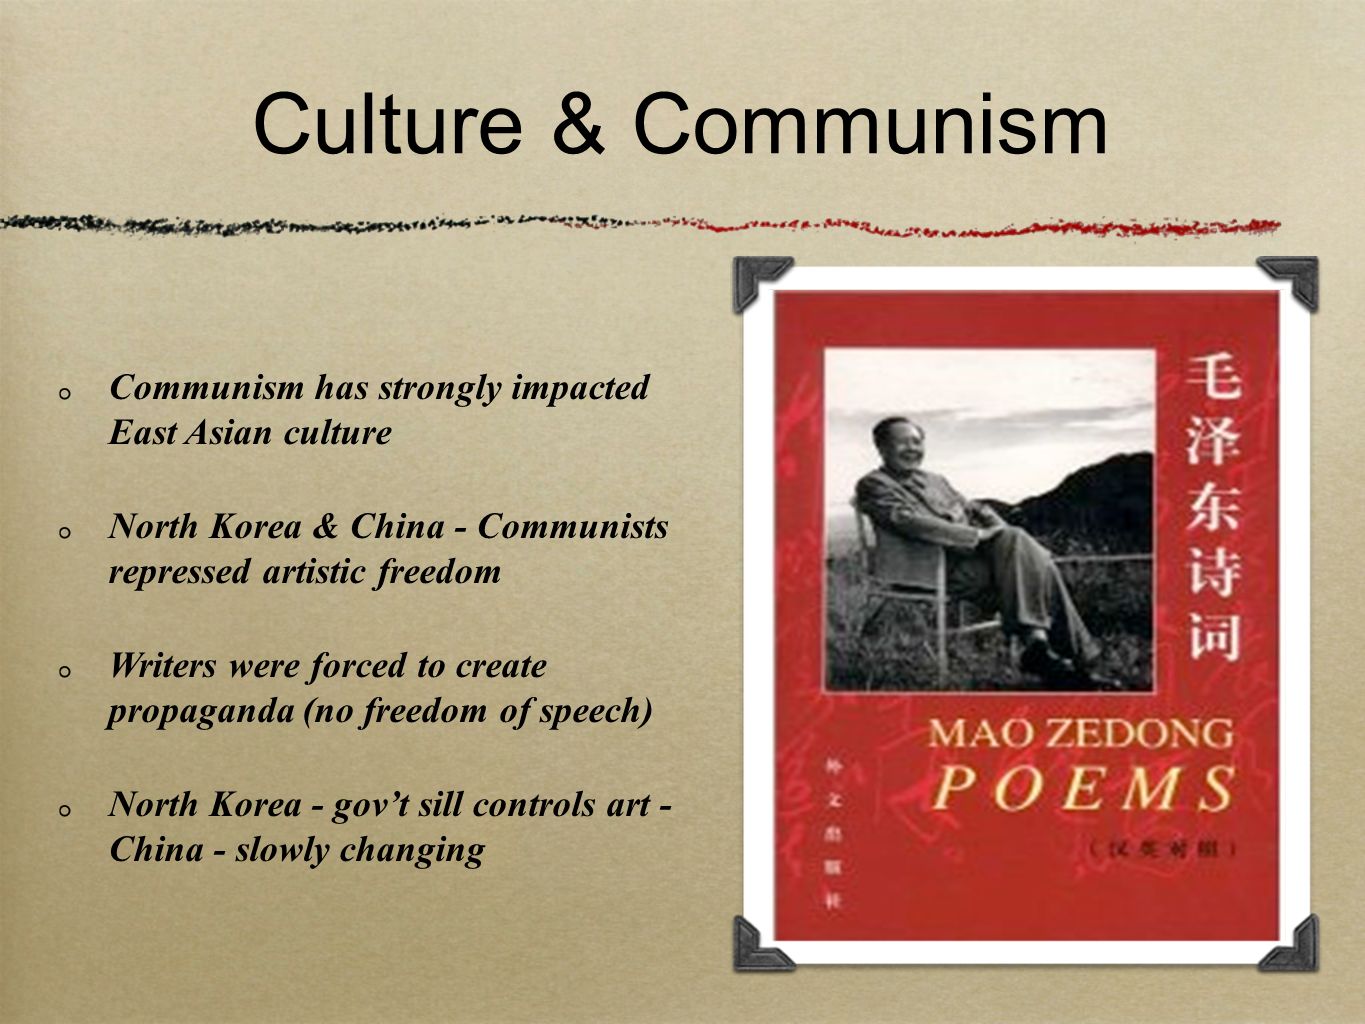 Culture & Communism Communism has strongly impacted East Asian culture North Korea & China - Communists repressed artistic freedom Writers were forced to create propaganda (no freedom of speech) North Korea - gov’t sill controls art - China - slowly changing